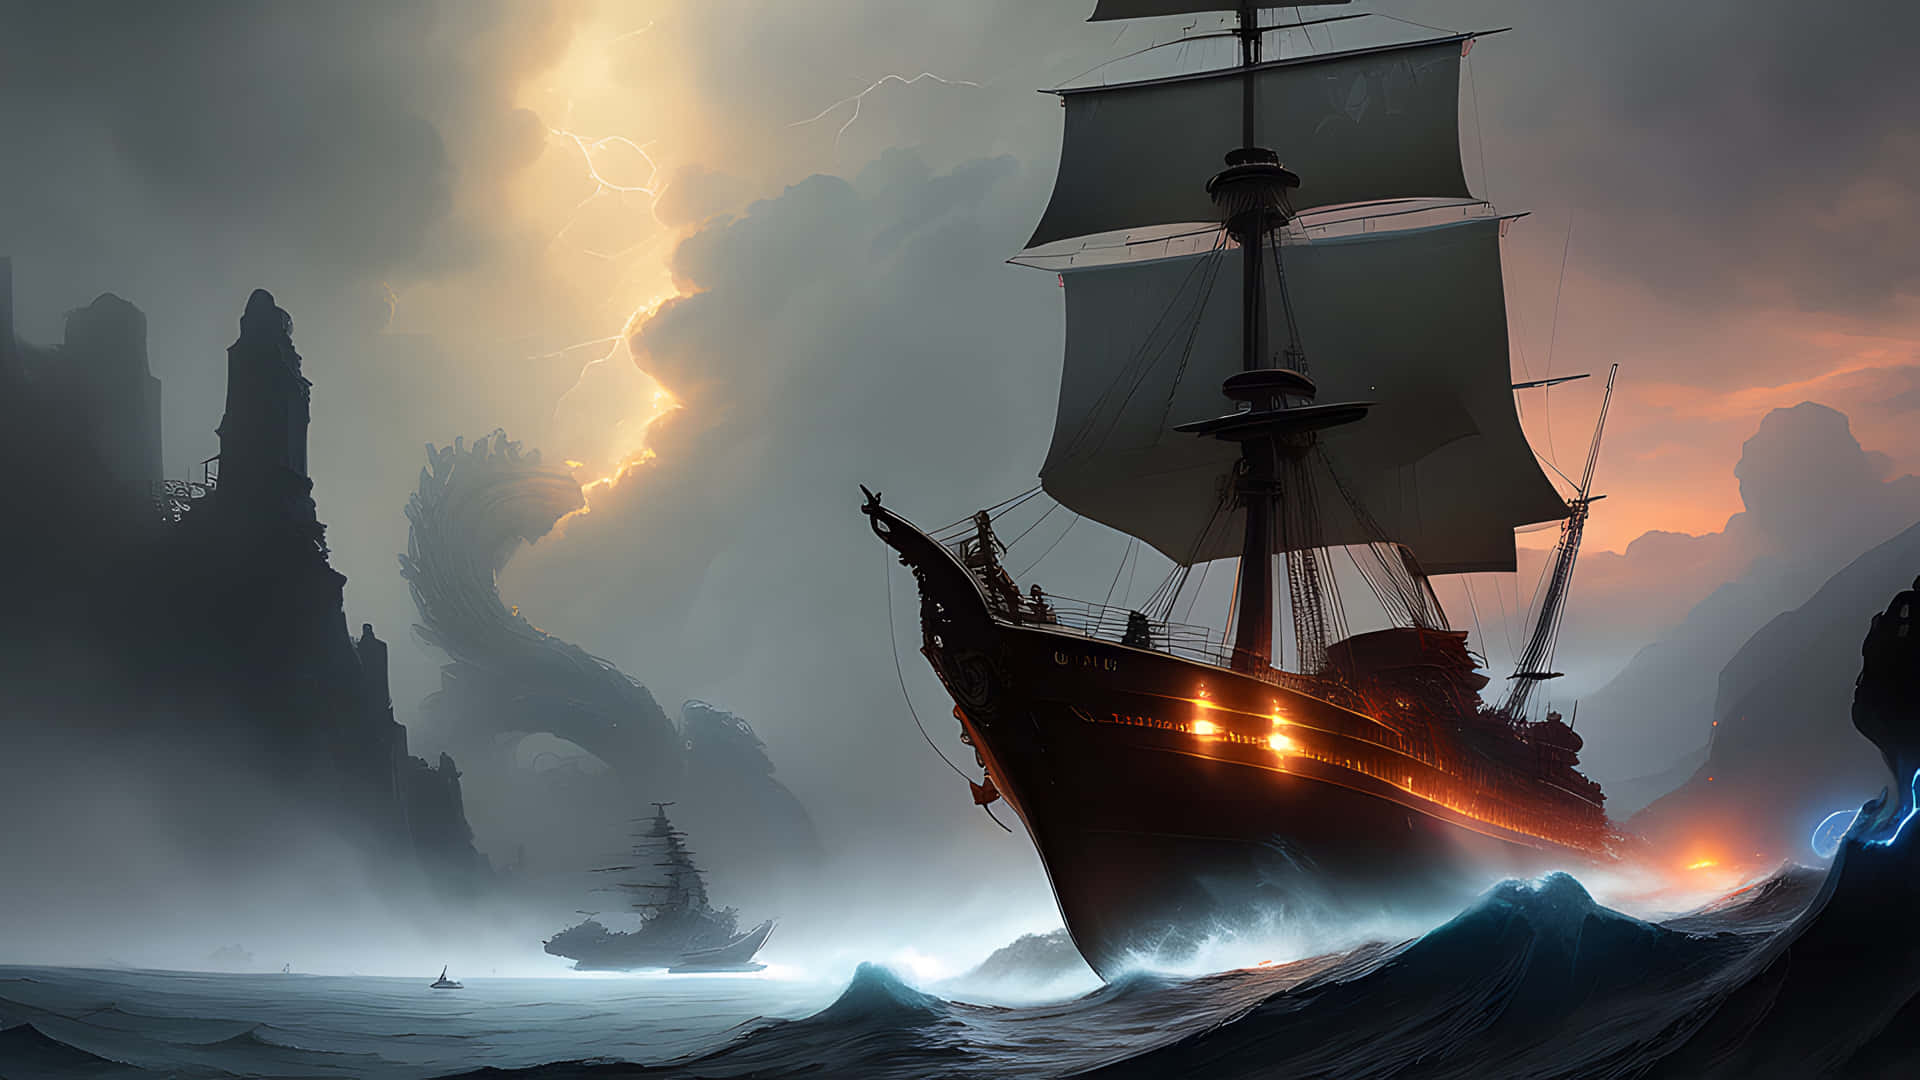 Stable Ship In Storm [wallpaper] Wallpaper